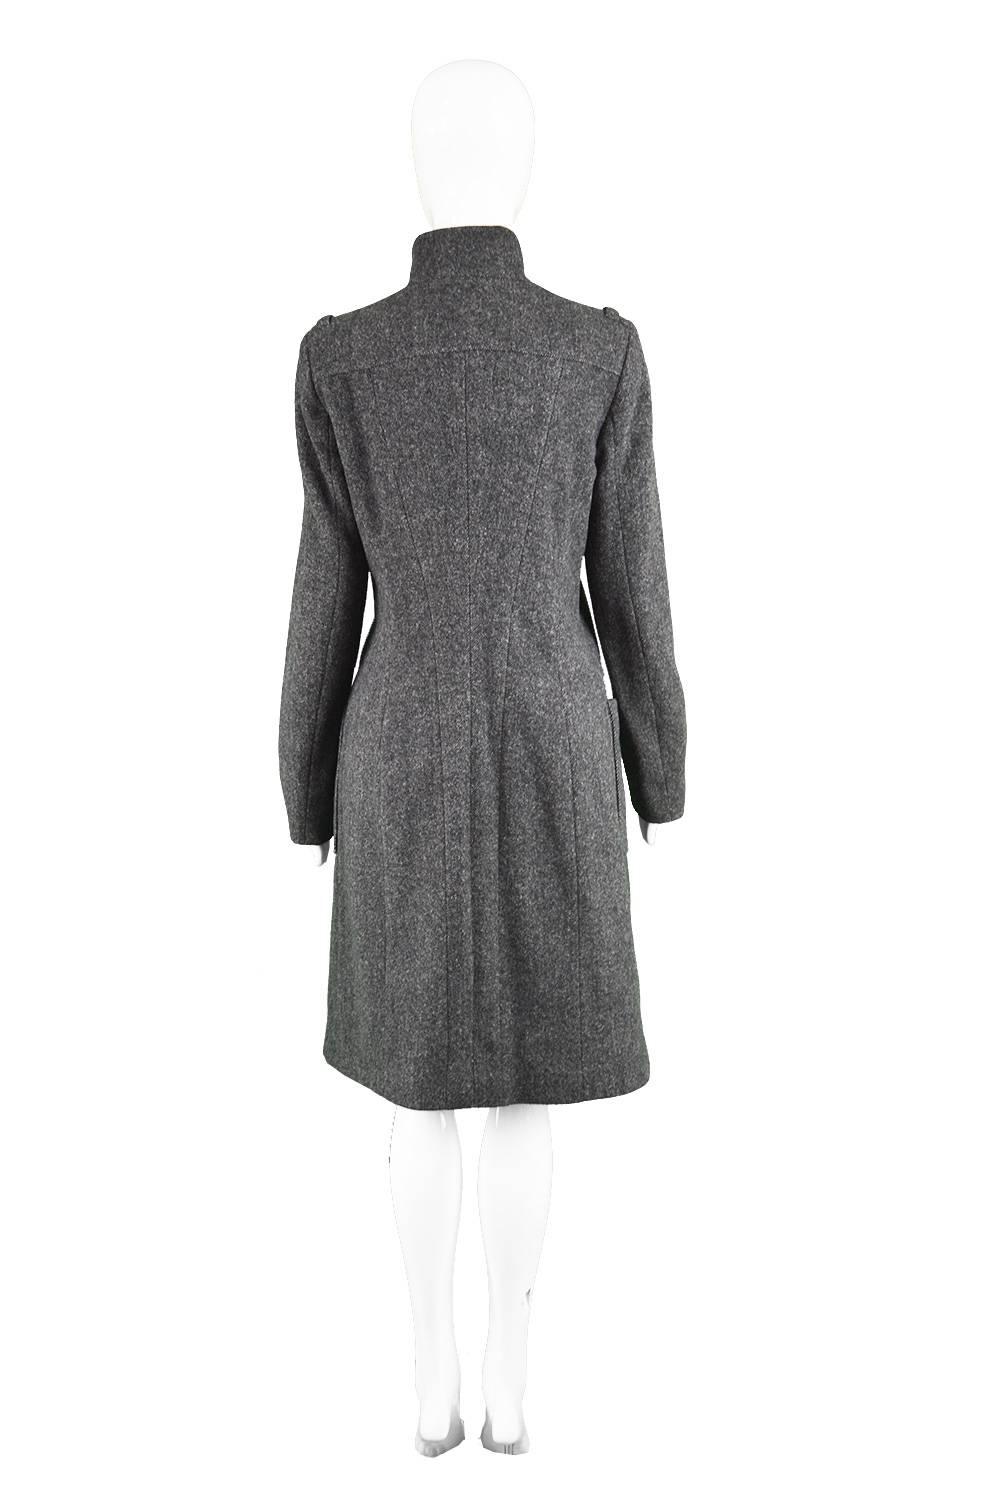 Balenciaga Nicolas Ghesquiere Gray Wool and Cashmere Military Style Coat, 2005 3